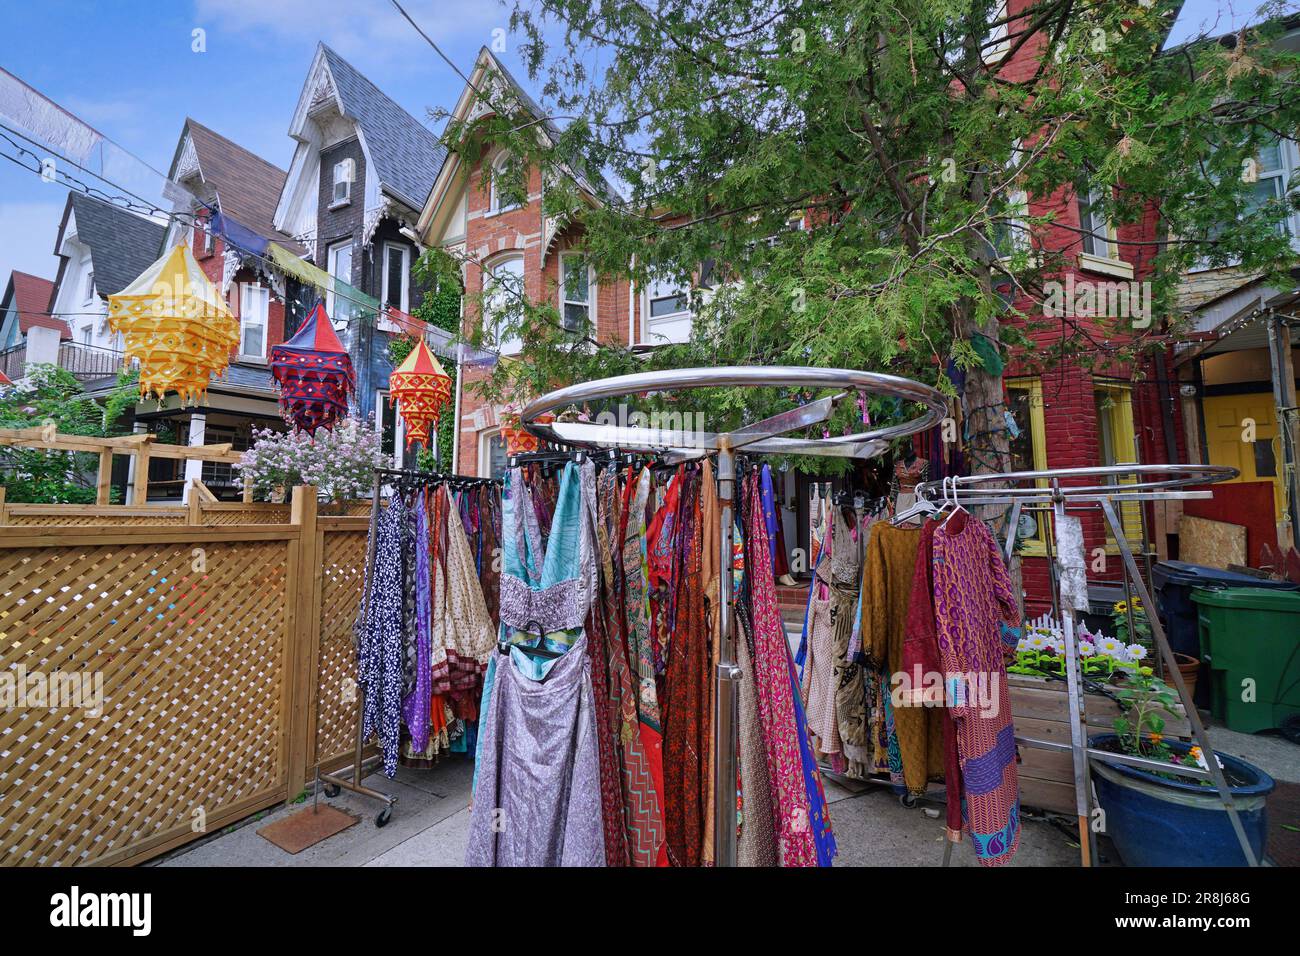 Colorful dresses for sale in the Kensington Market area where old houses have been converted to stores Stock Photo